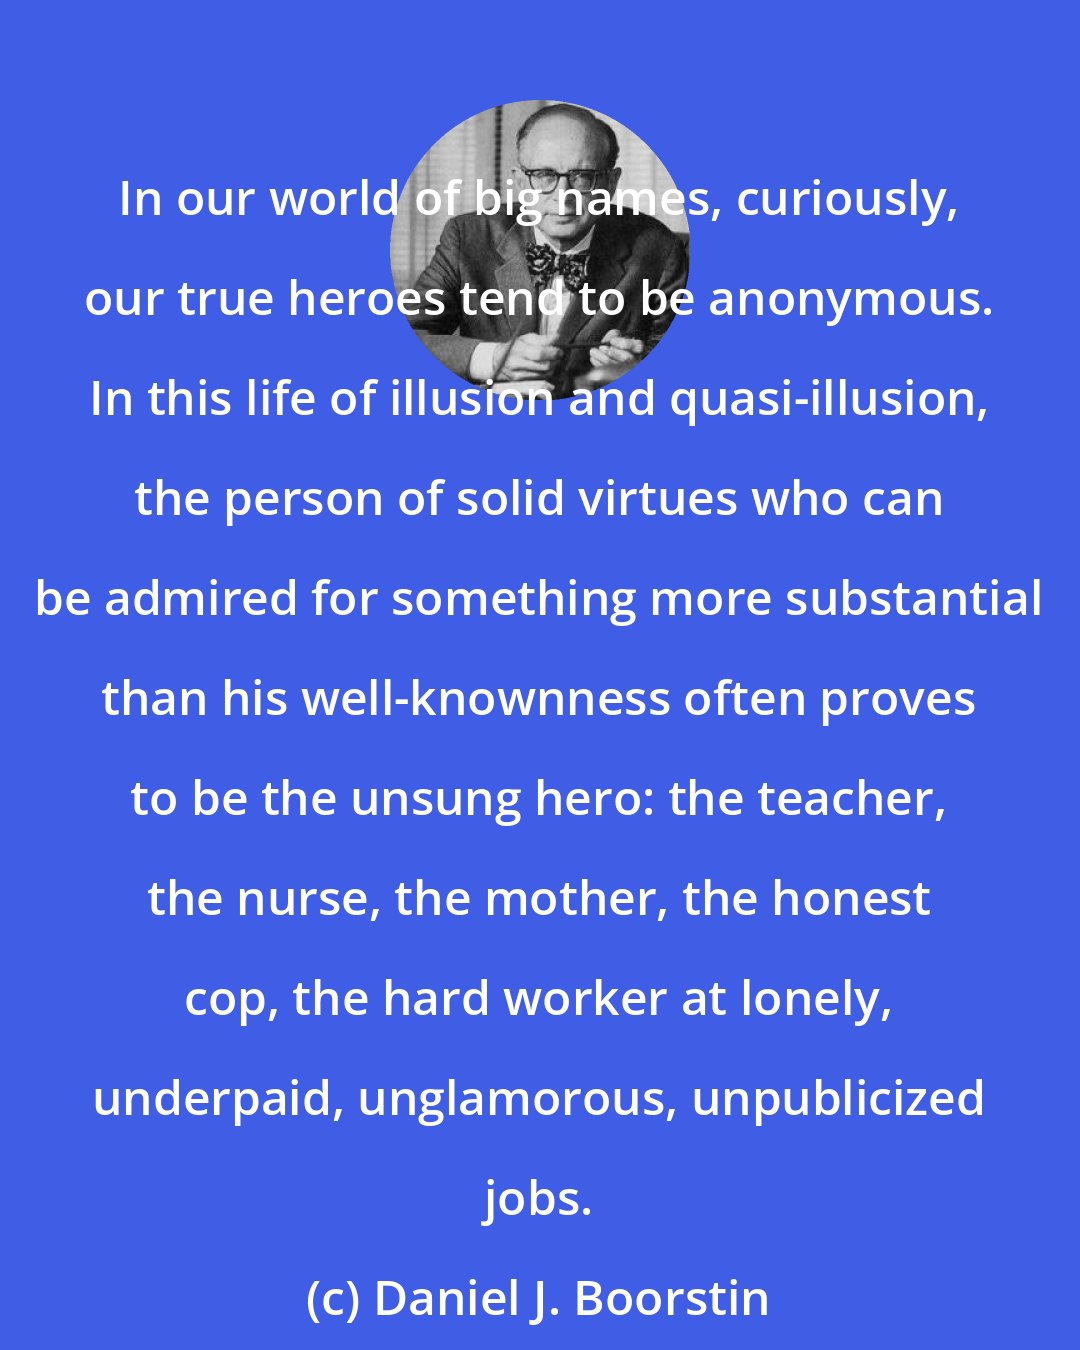 Daniel J. Boorstin: In our world of big names, curiously, our true heroes tend to be anonymous. In this life of illusion and quasi-illusion, the person of solid virtues who can be admired for something more substantial than his well-knownness often proves to be the unsung hero: the teacher, the nurse, the mother, the honest cop, the hard worker at lonely, underpaid, unglamorous, unpublicized jobs.